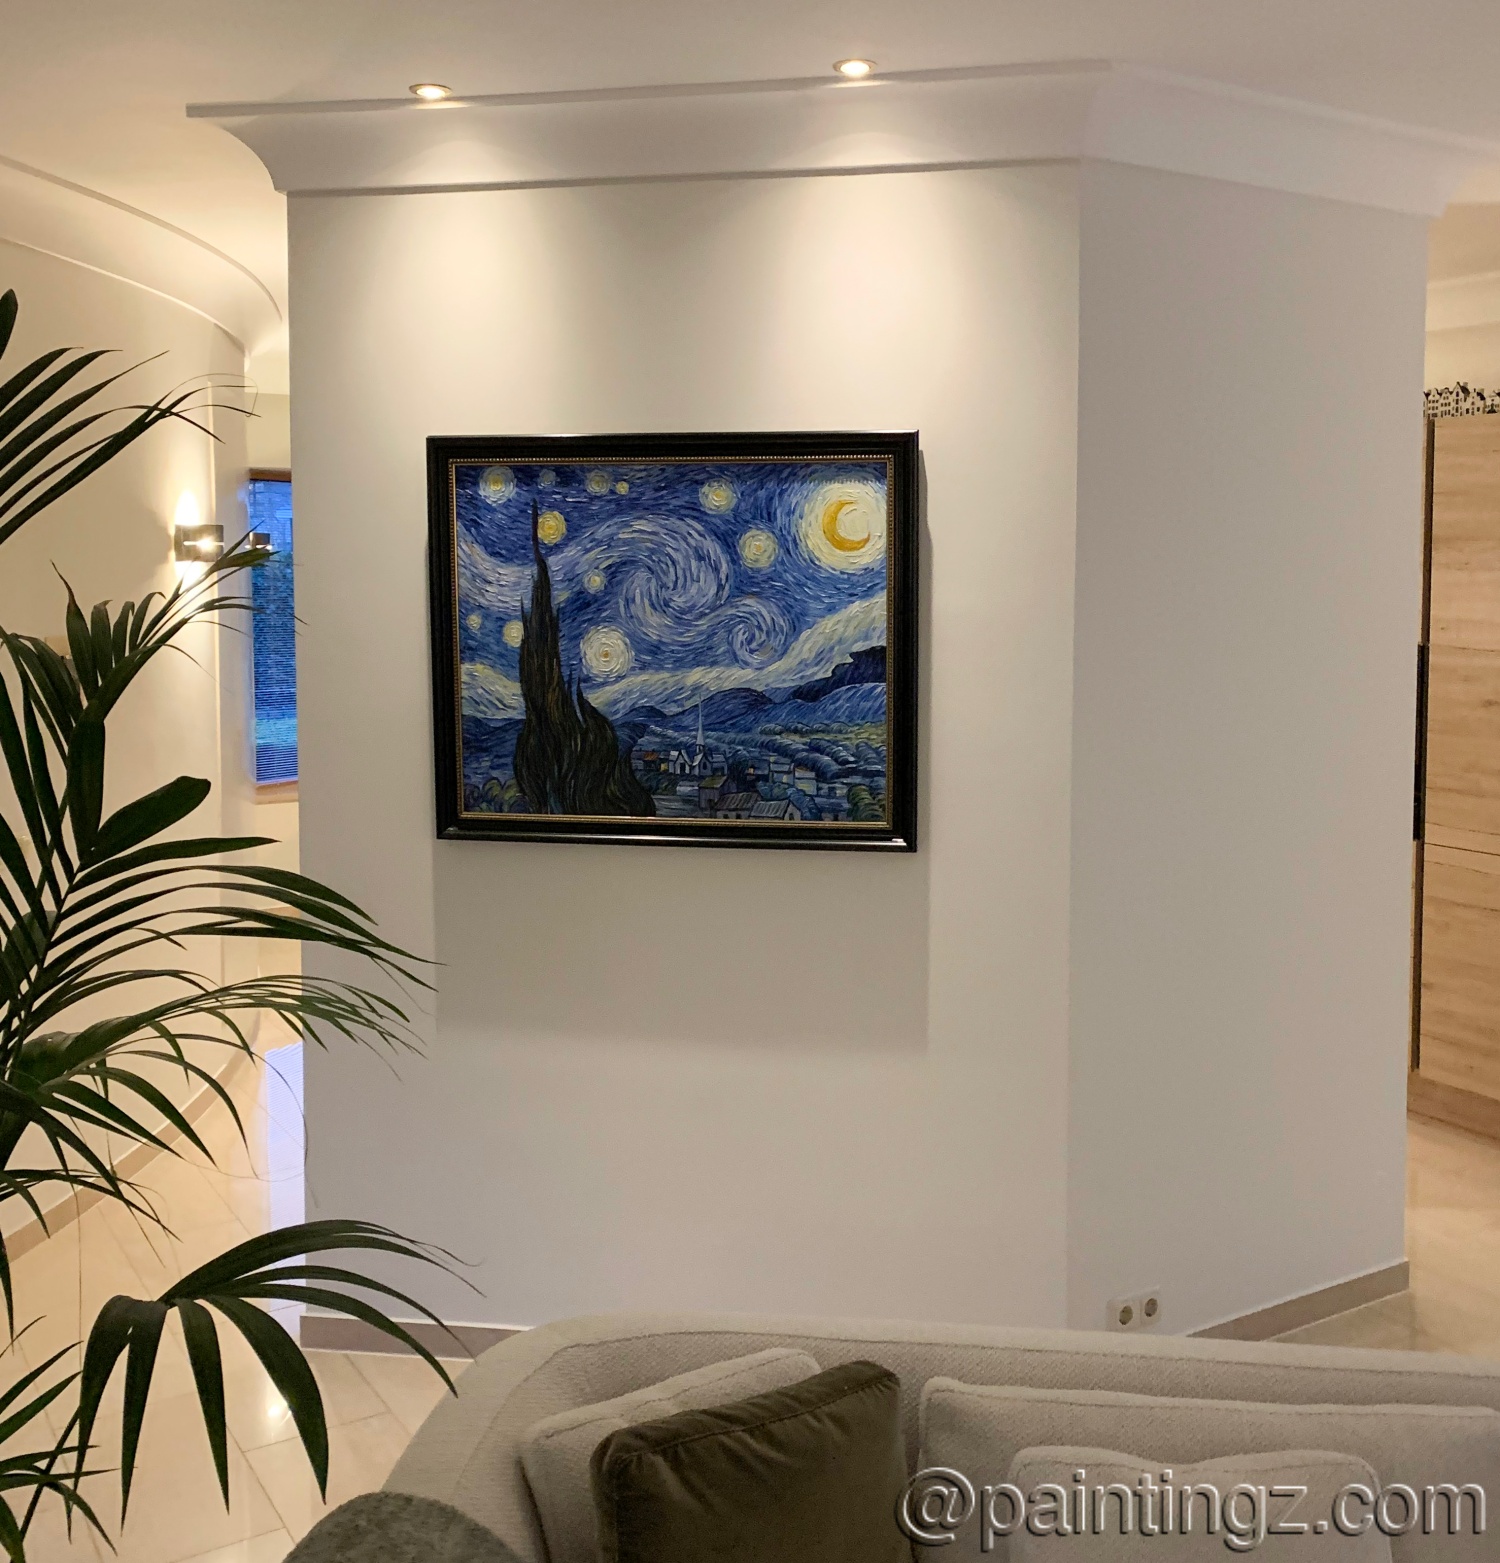 Starry Night Reproduction Painting Hanging in a Neitherland House